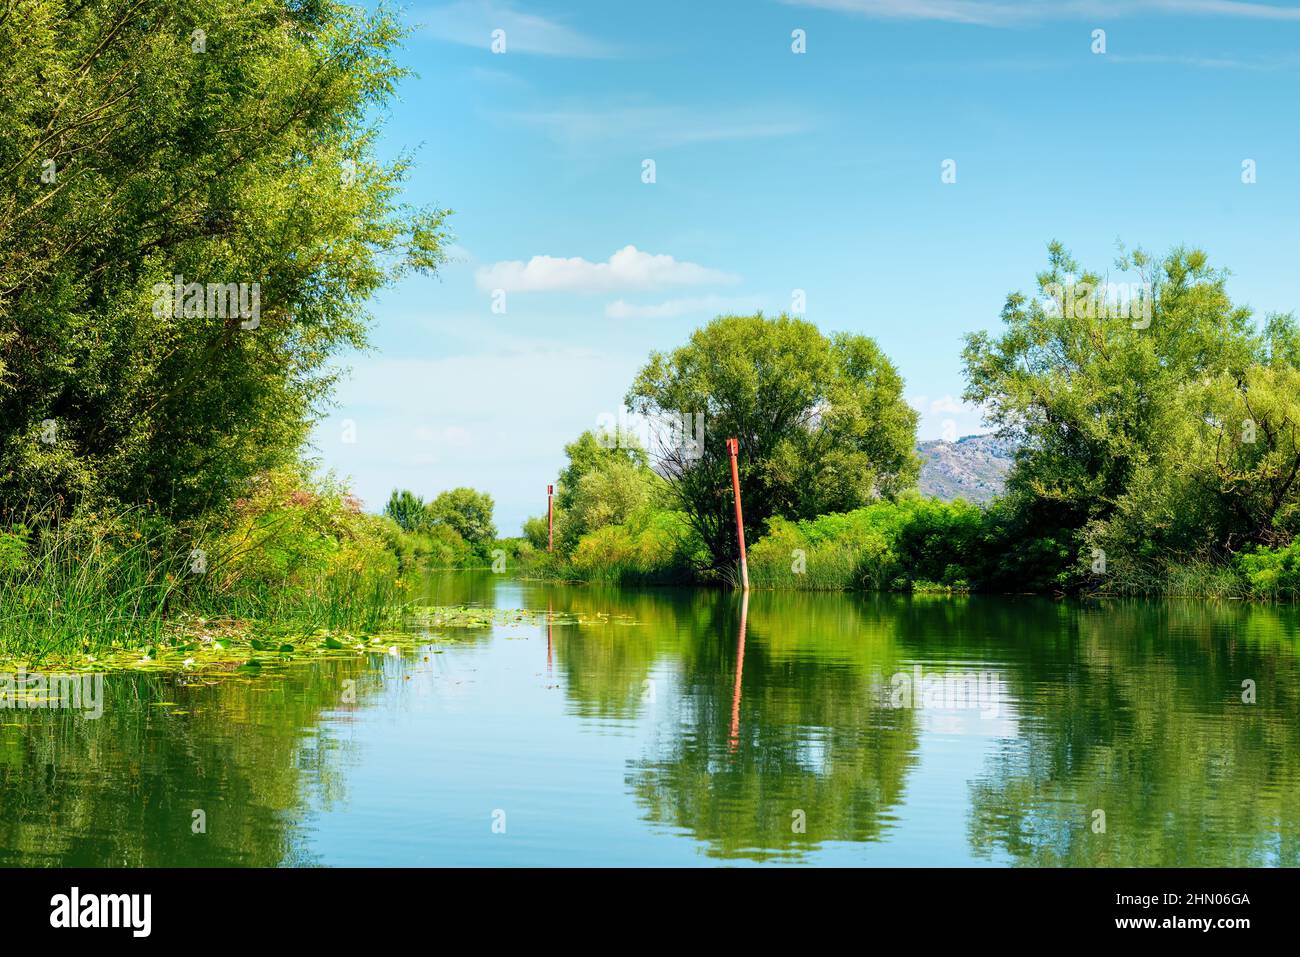 View of the Skadar lake in the national park of Montenegro Stock Photo